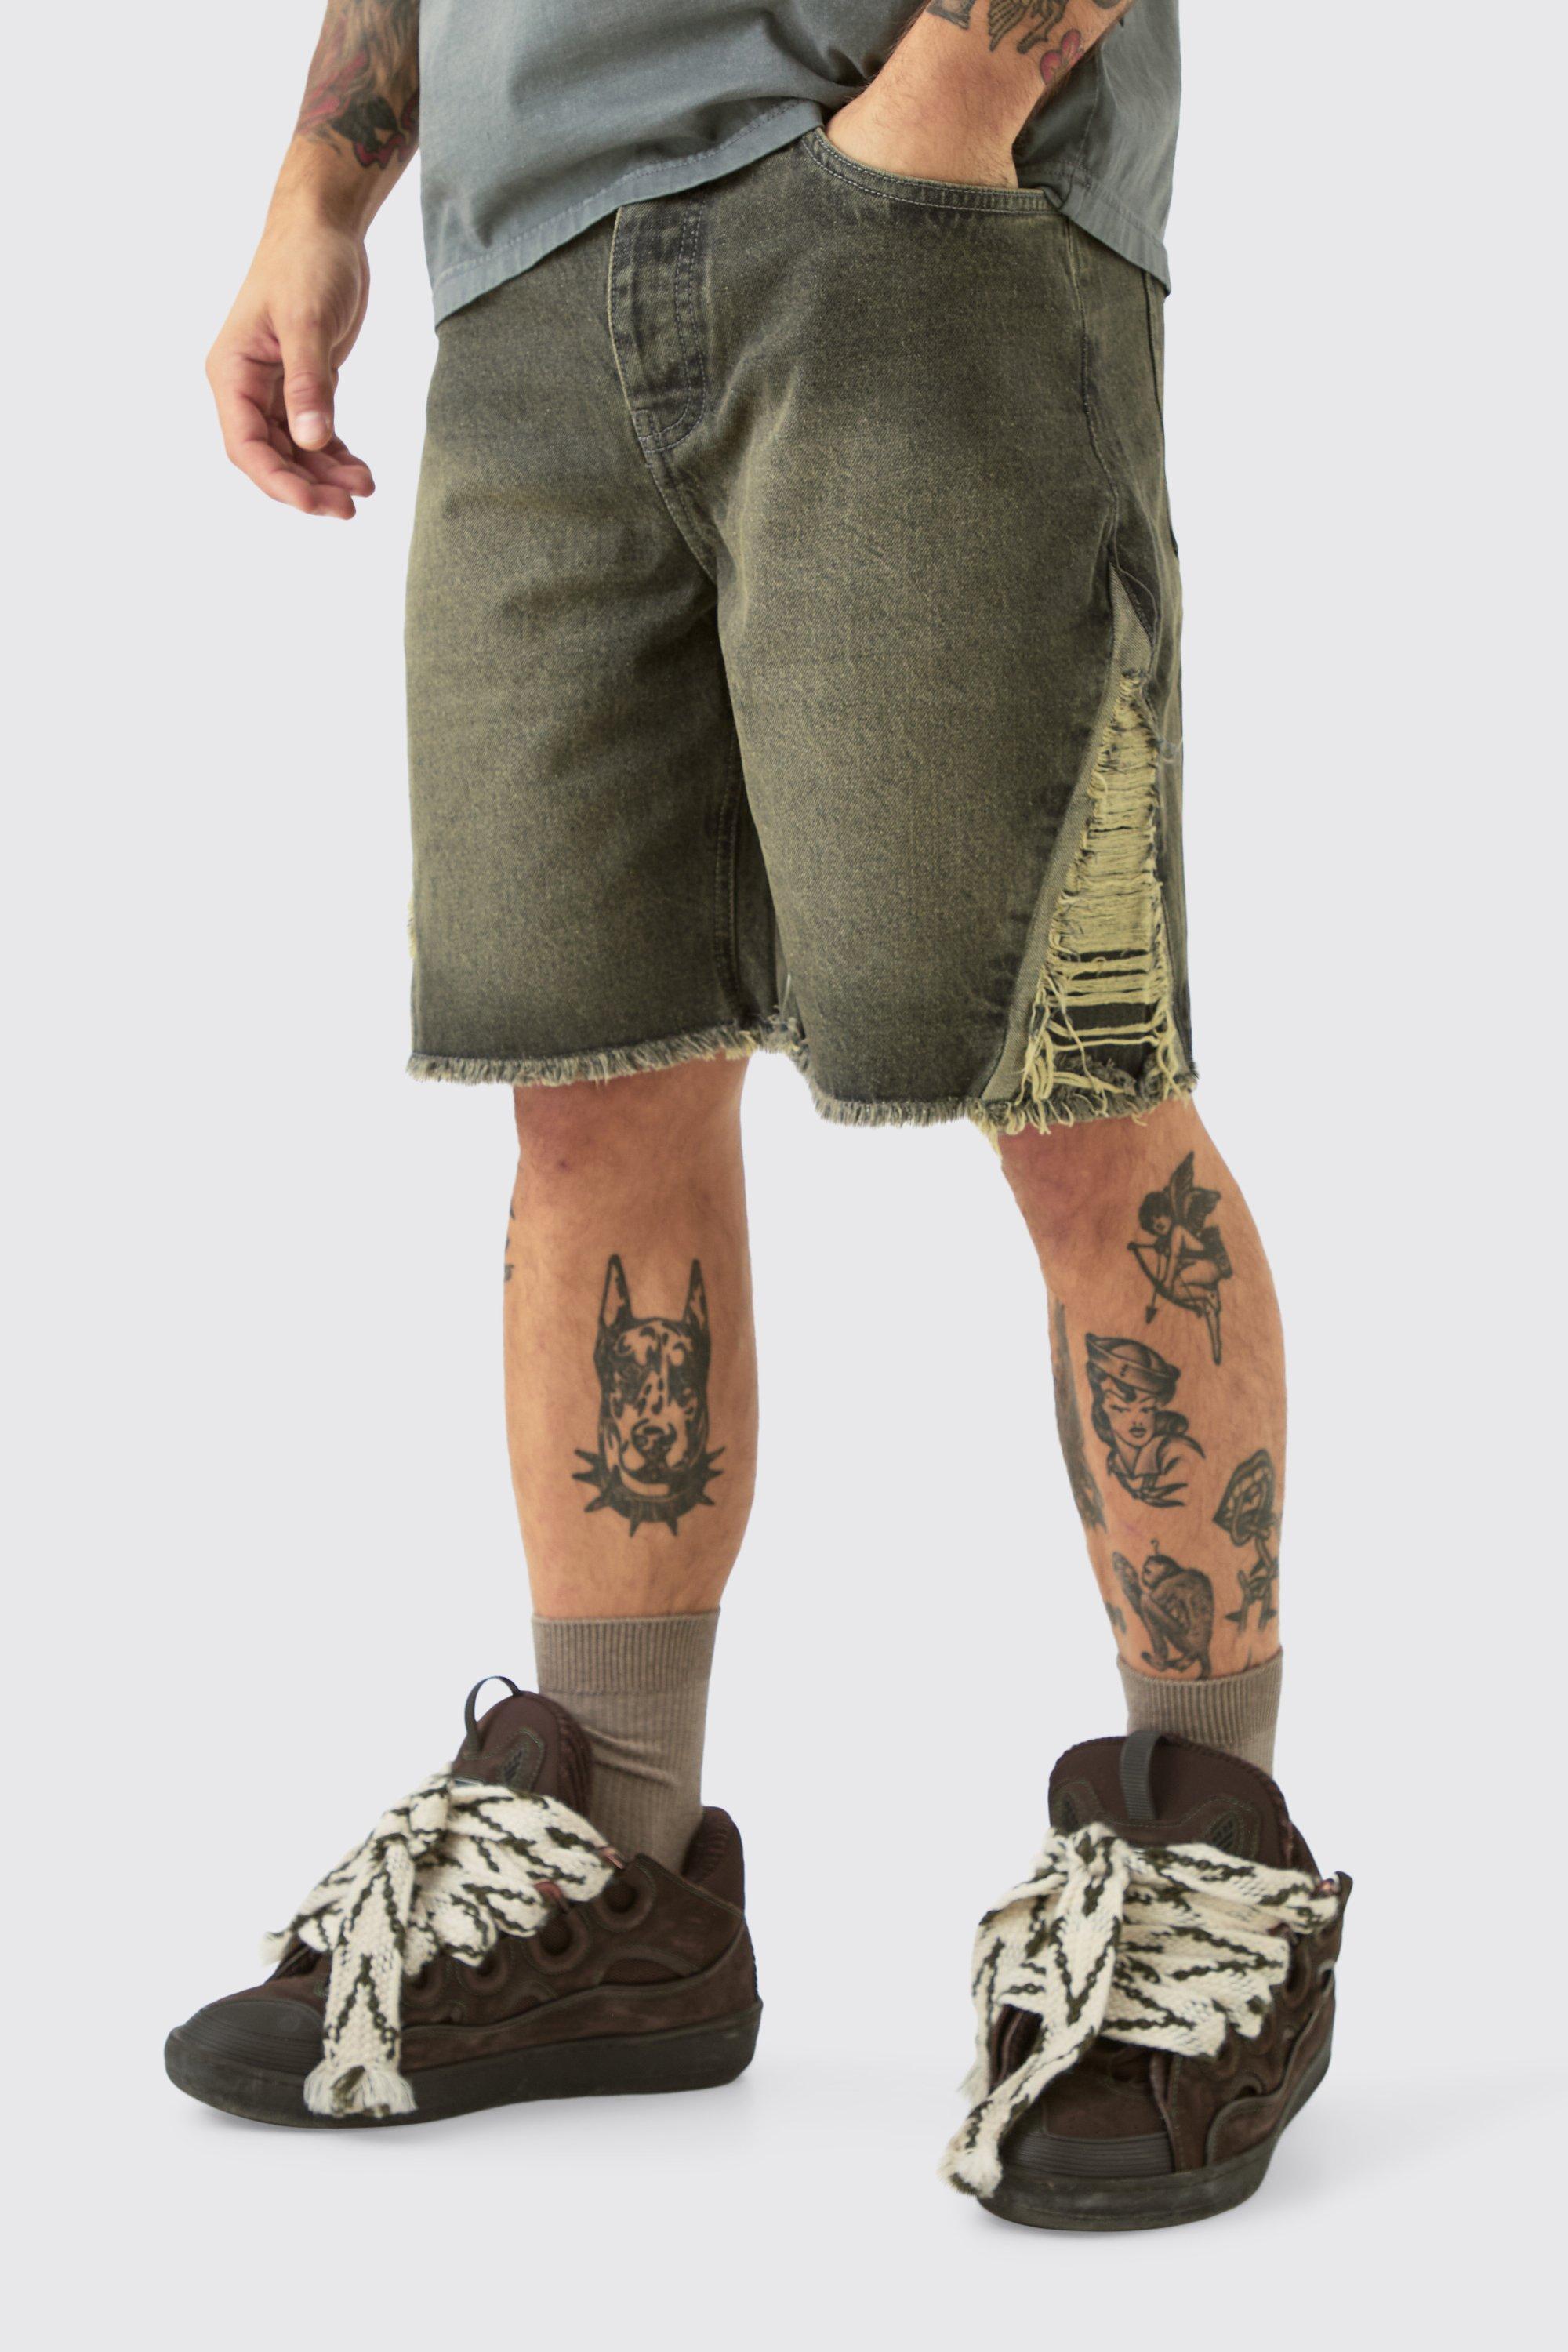 Image of Relaxed Rigid Extreme Side Ripped Denim Short In Antique Grey, Grigio